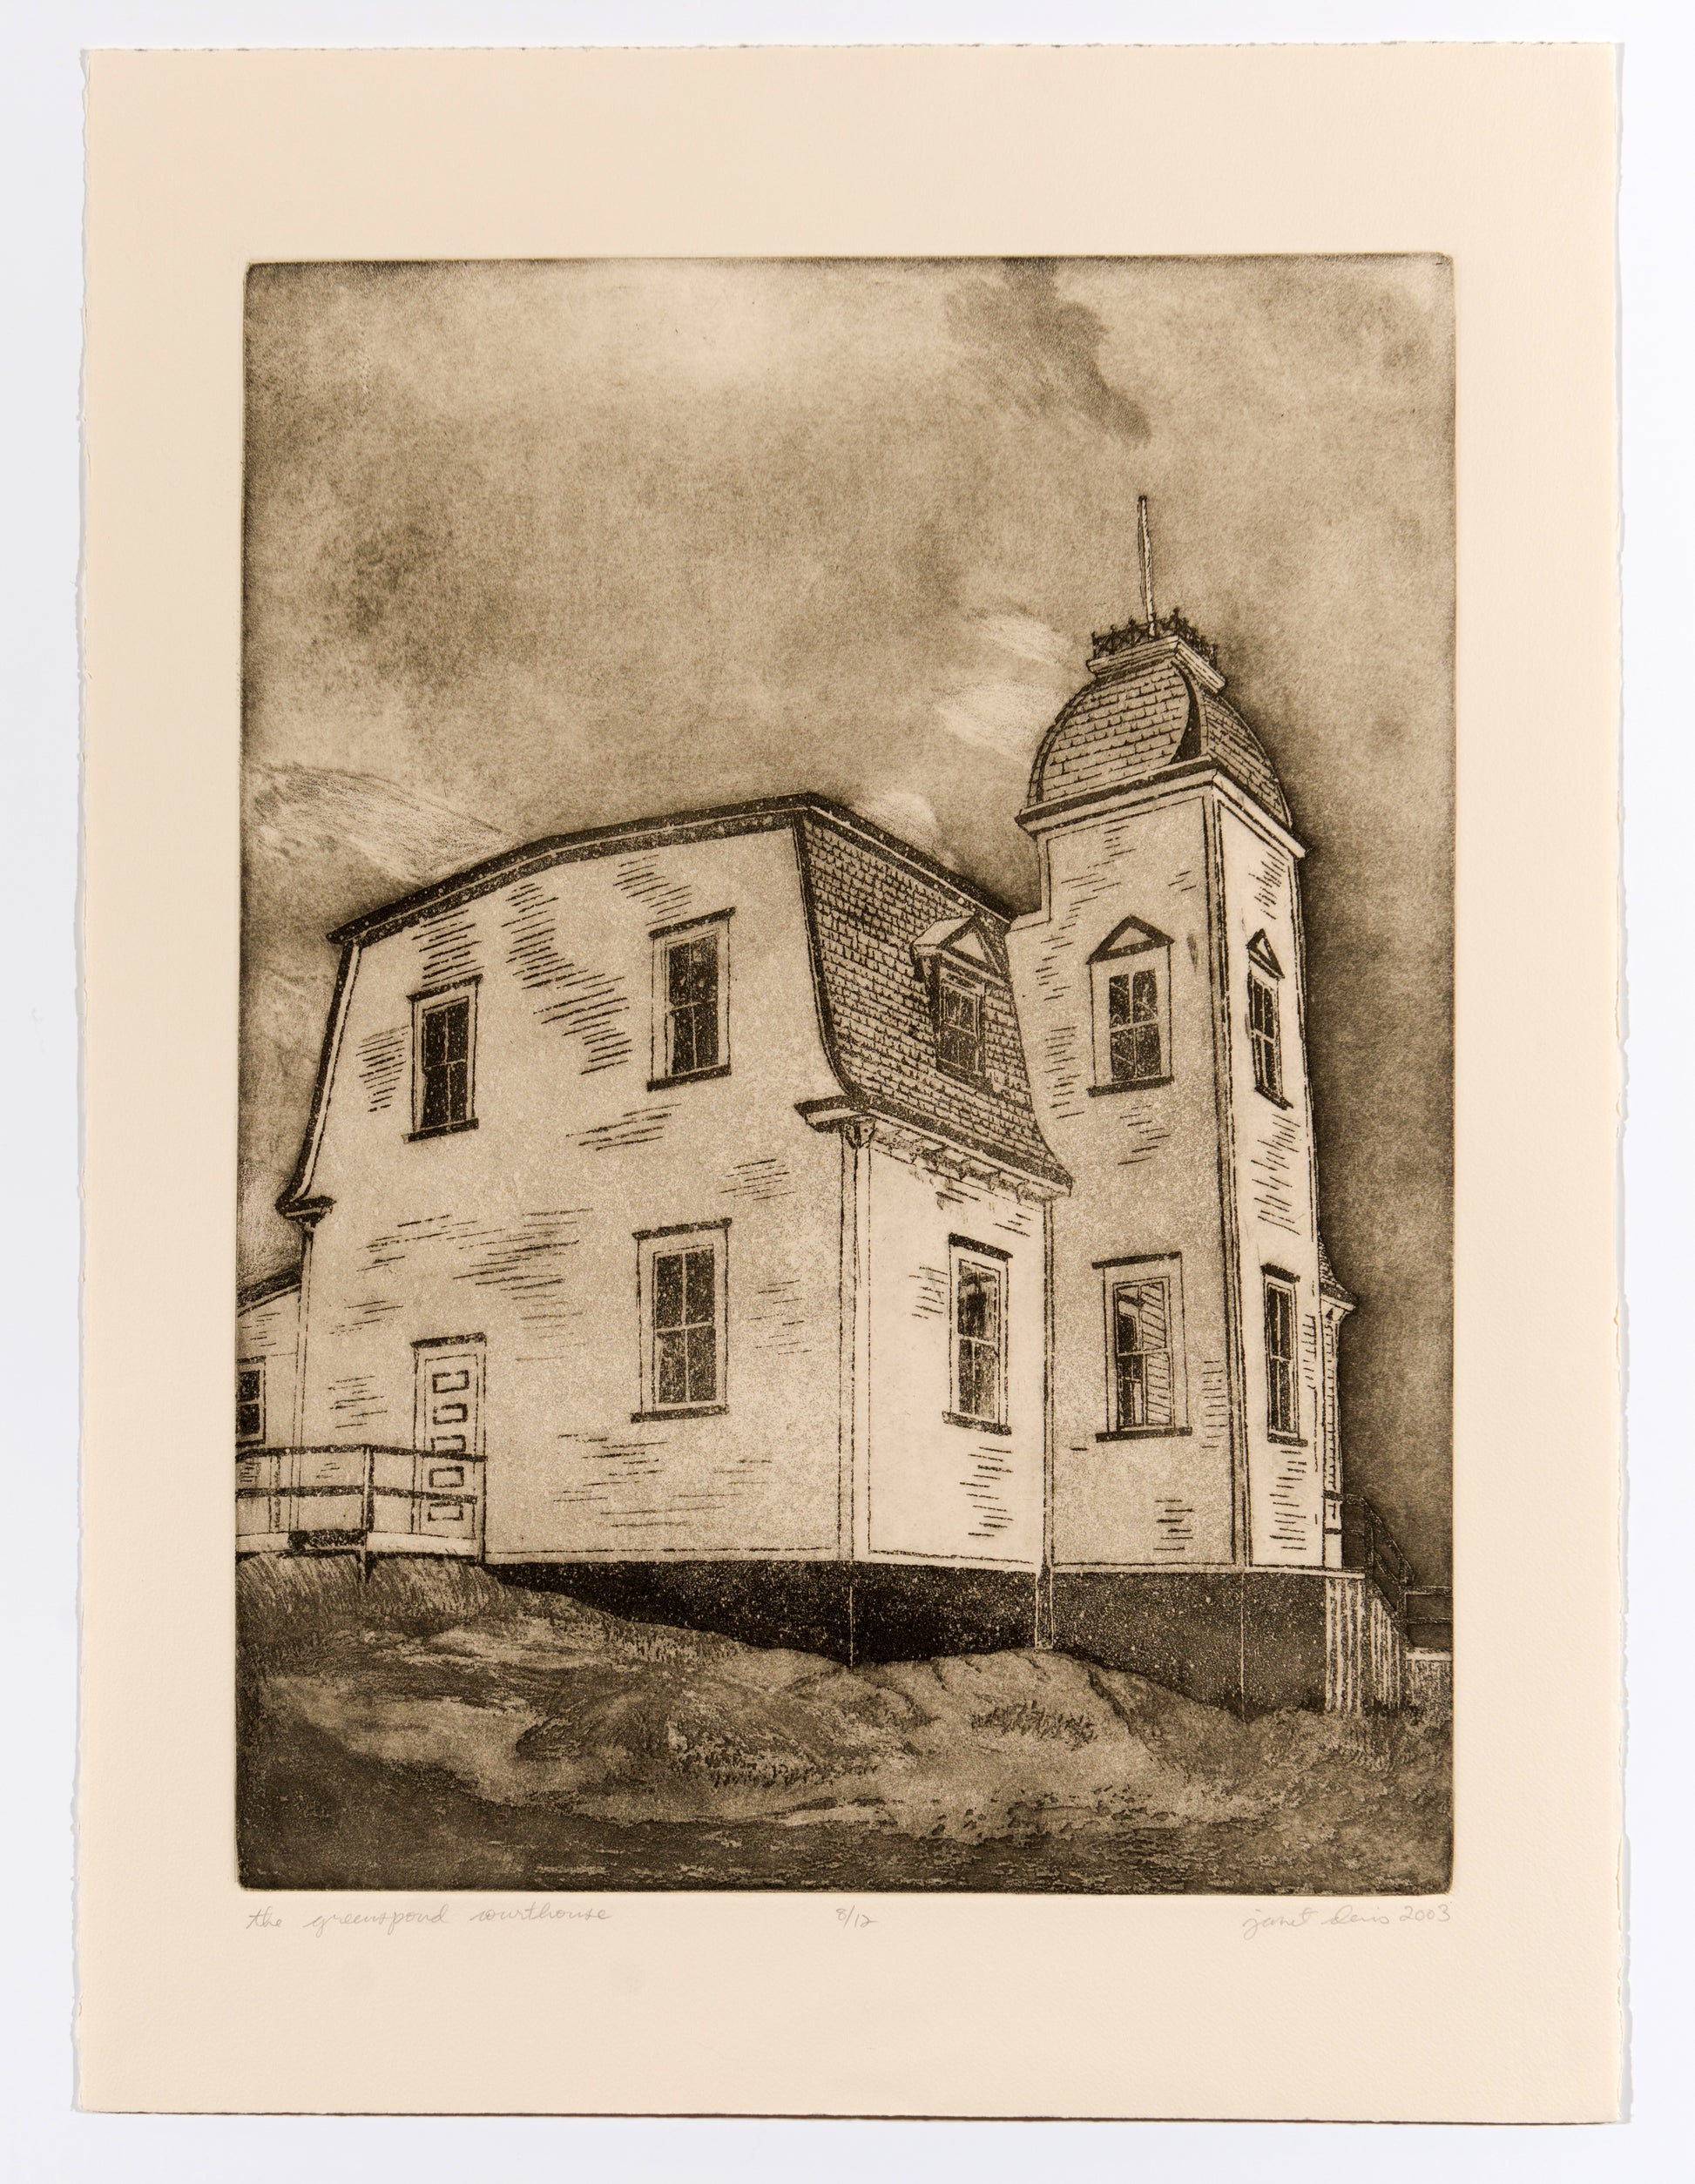 Etching of the Greenspond Courthouse by Janet Davis 2003, sepia ink on buff cotton fibre paper.  